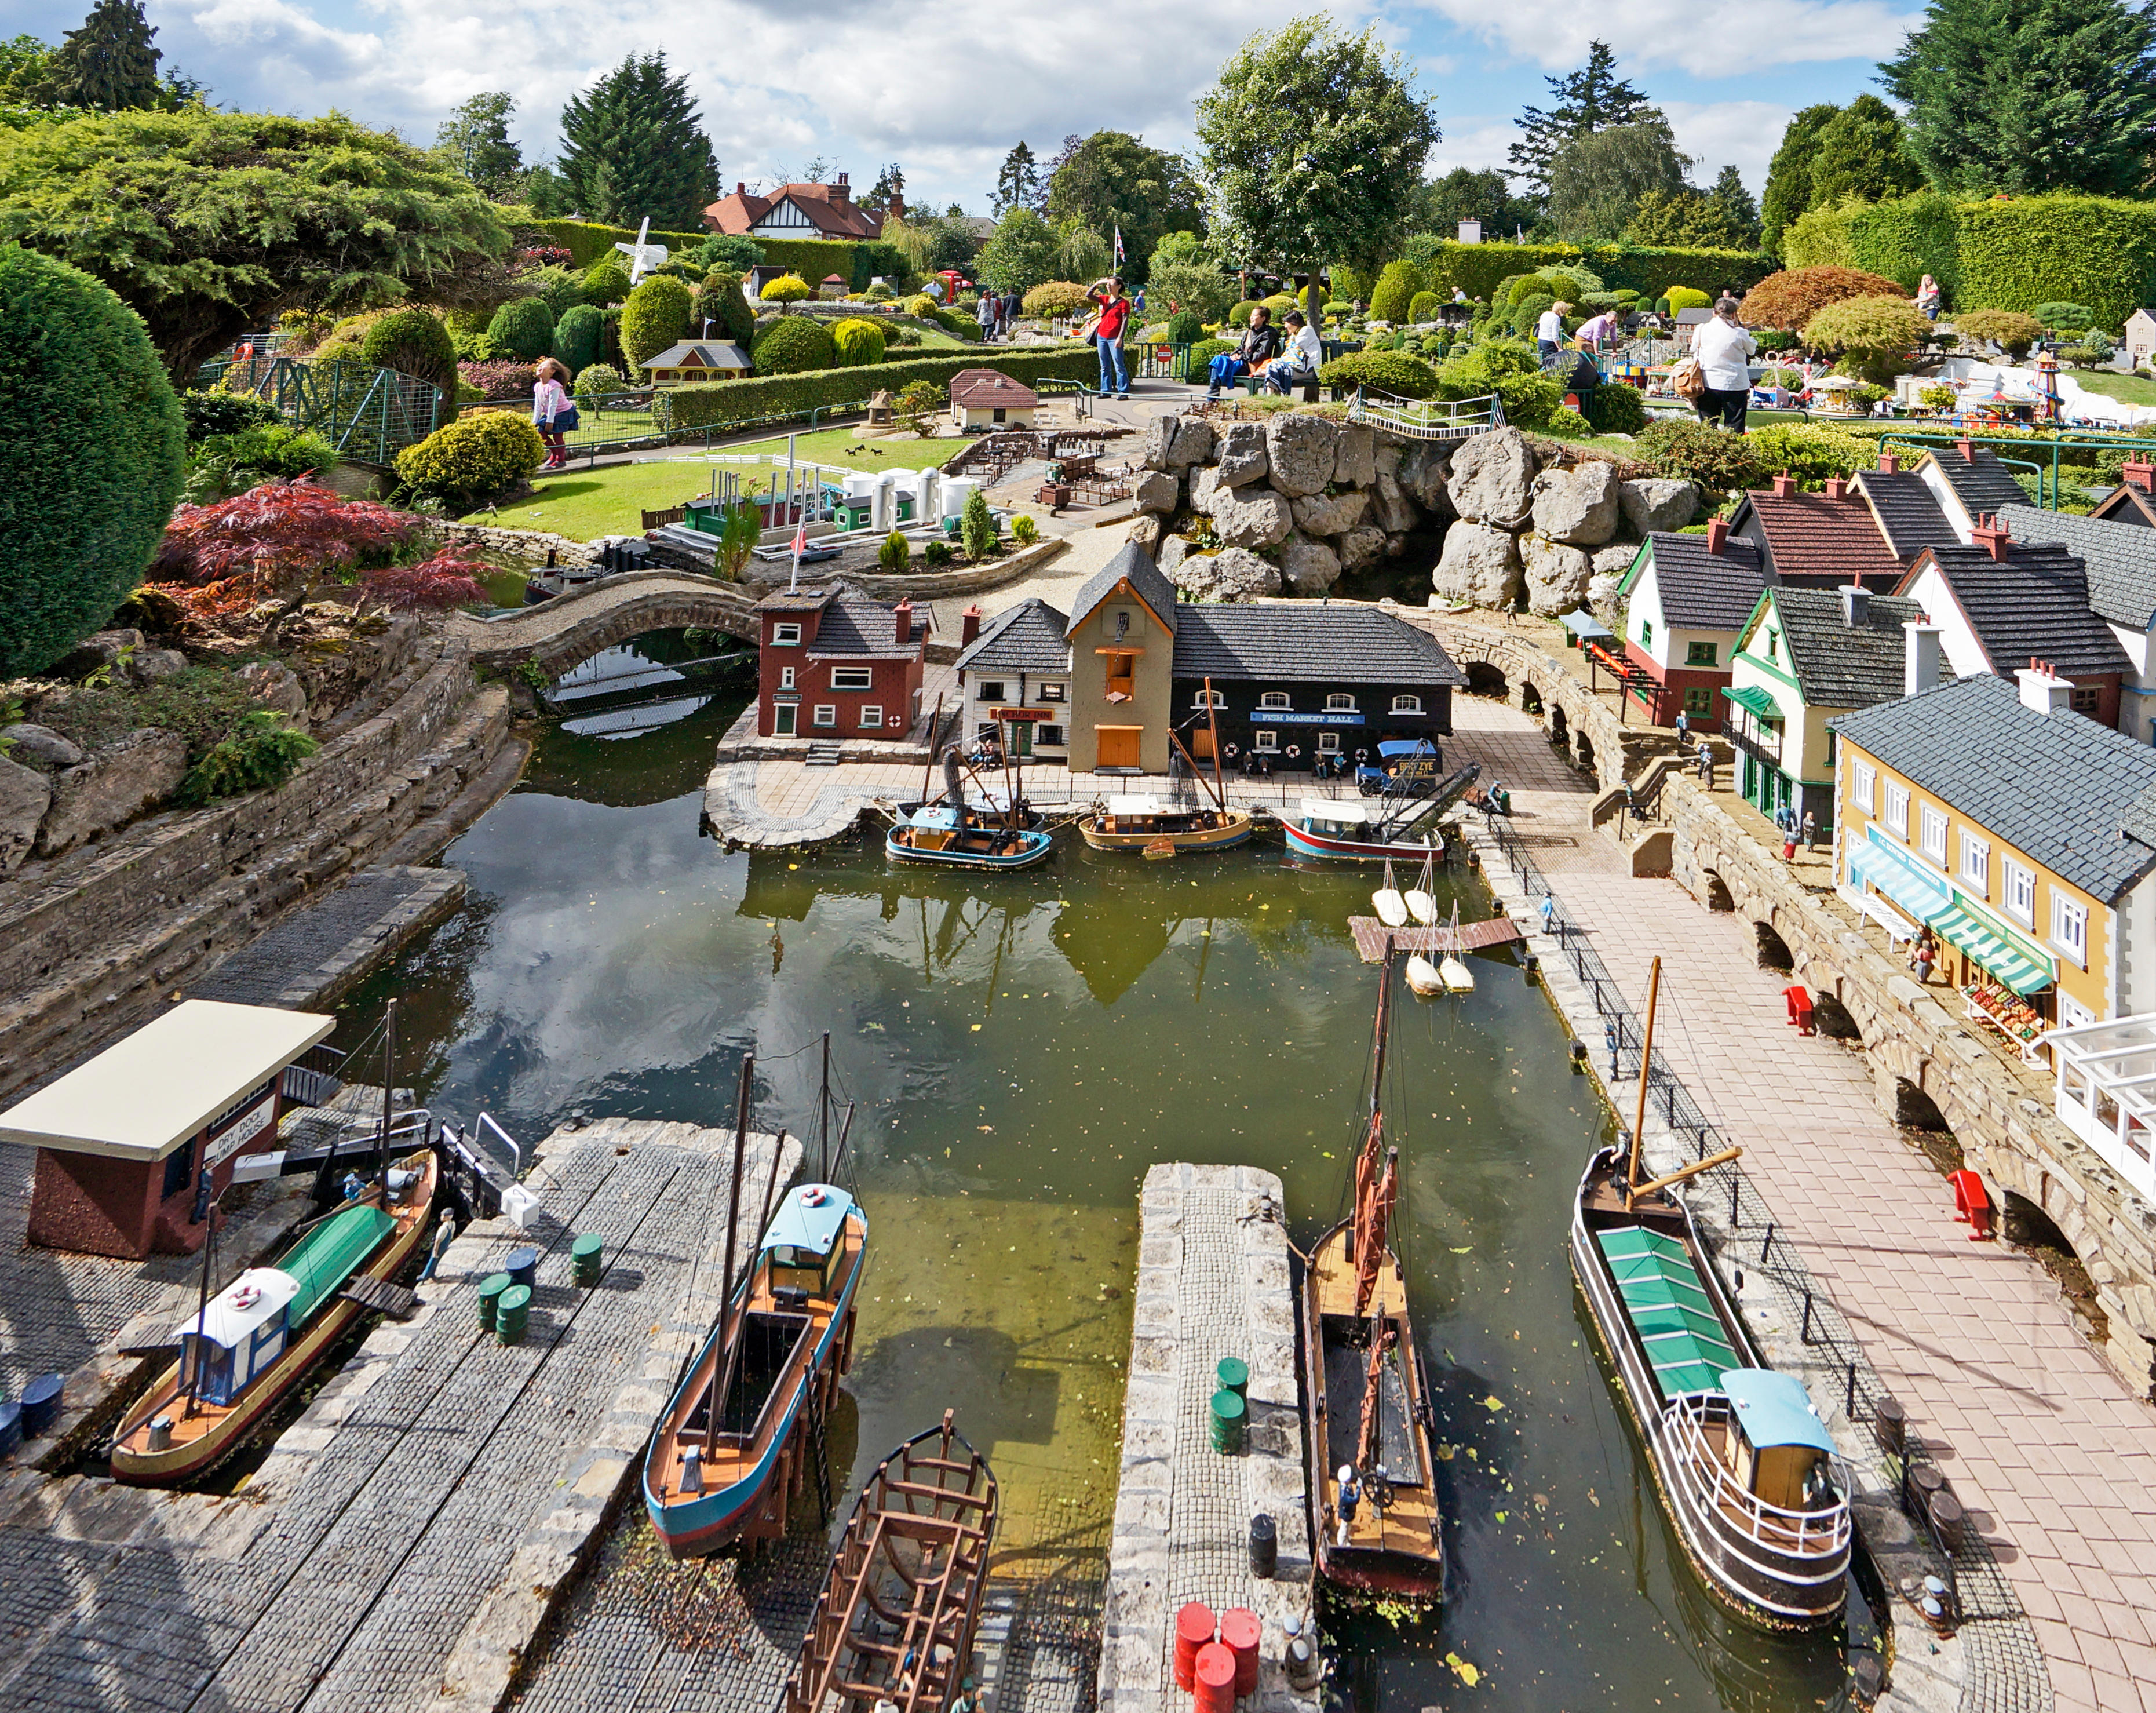 Bekonscot Model Village & Railway claims to be the oldest model village in the world